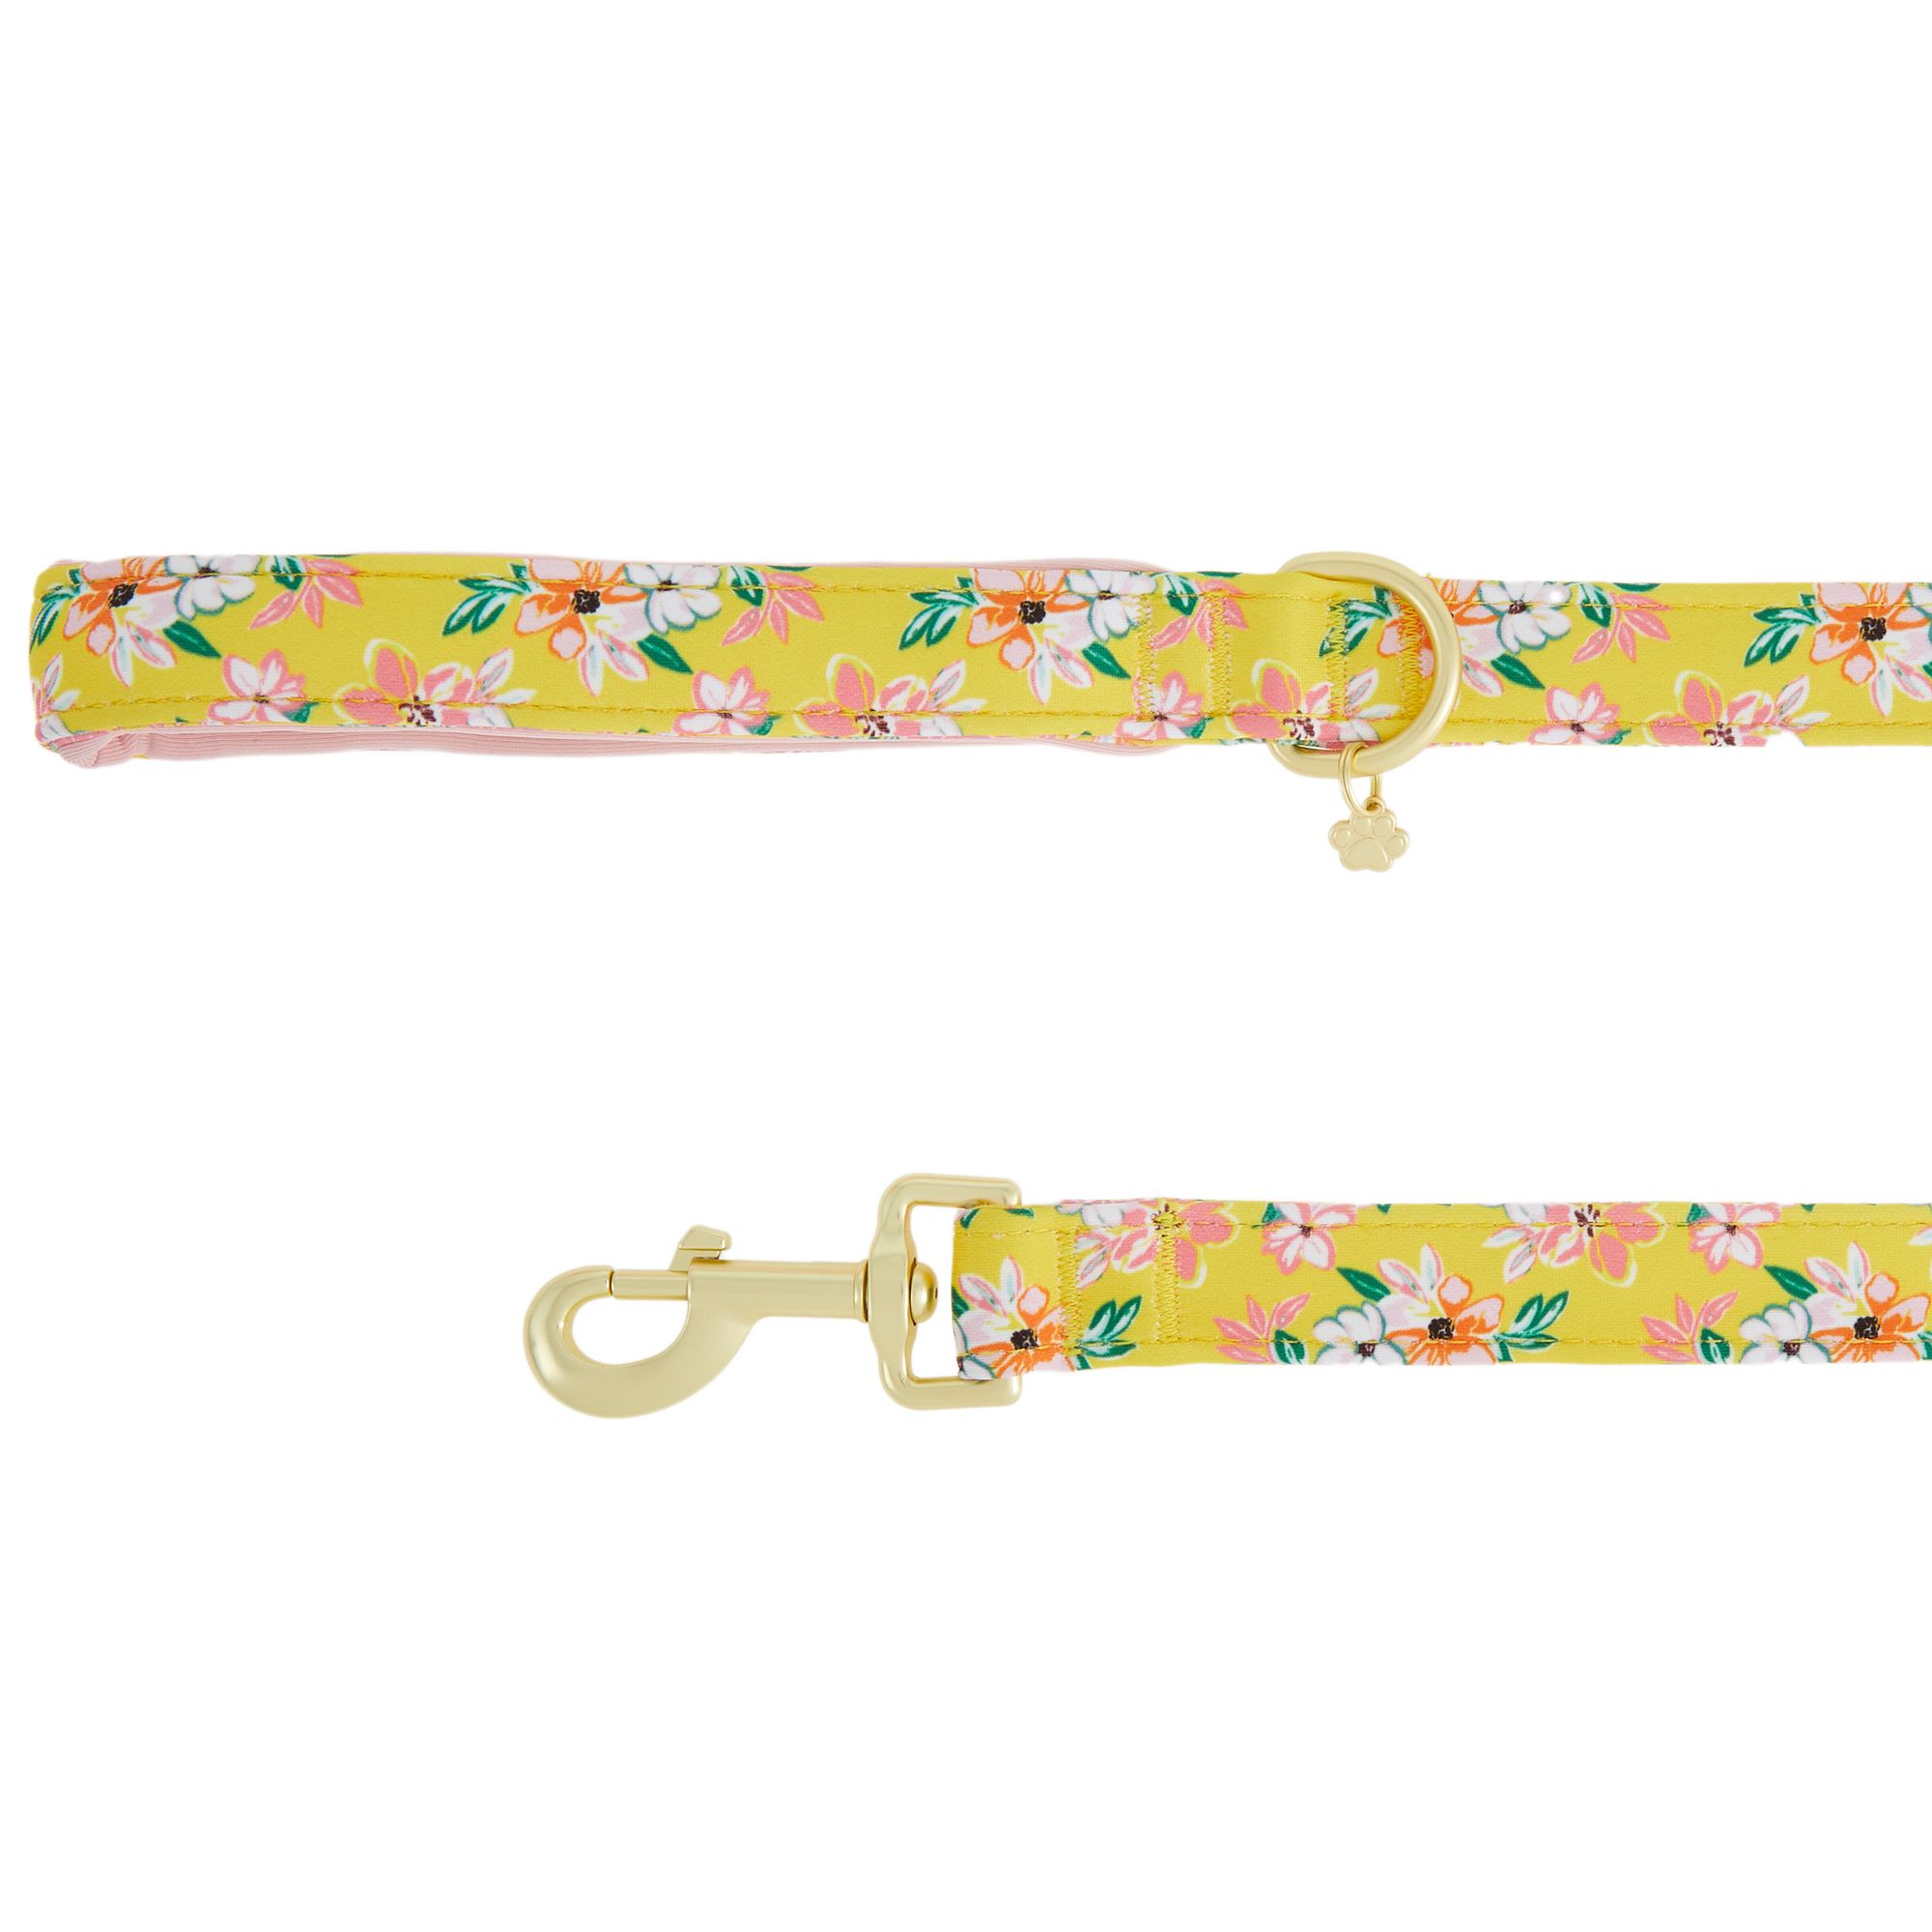 Top Paw&reg; Yellow Floral Neoprene Dog Leash: 4-ft long, 1-in wide